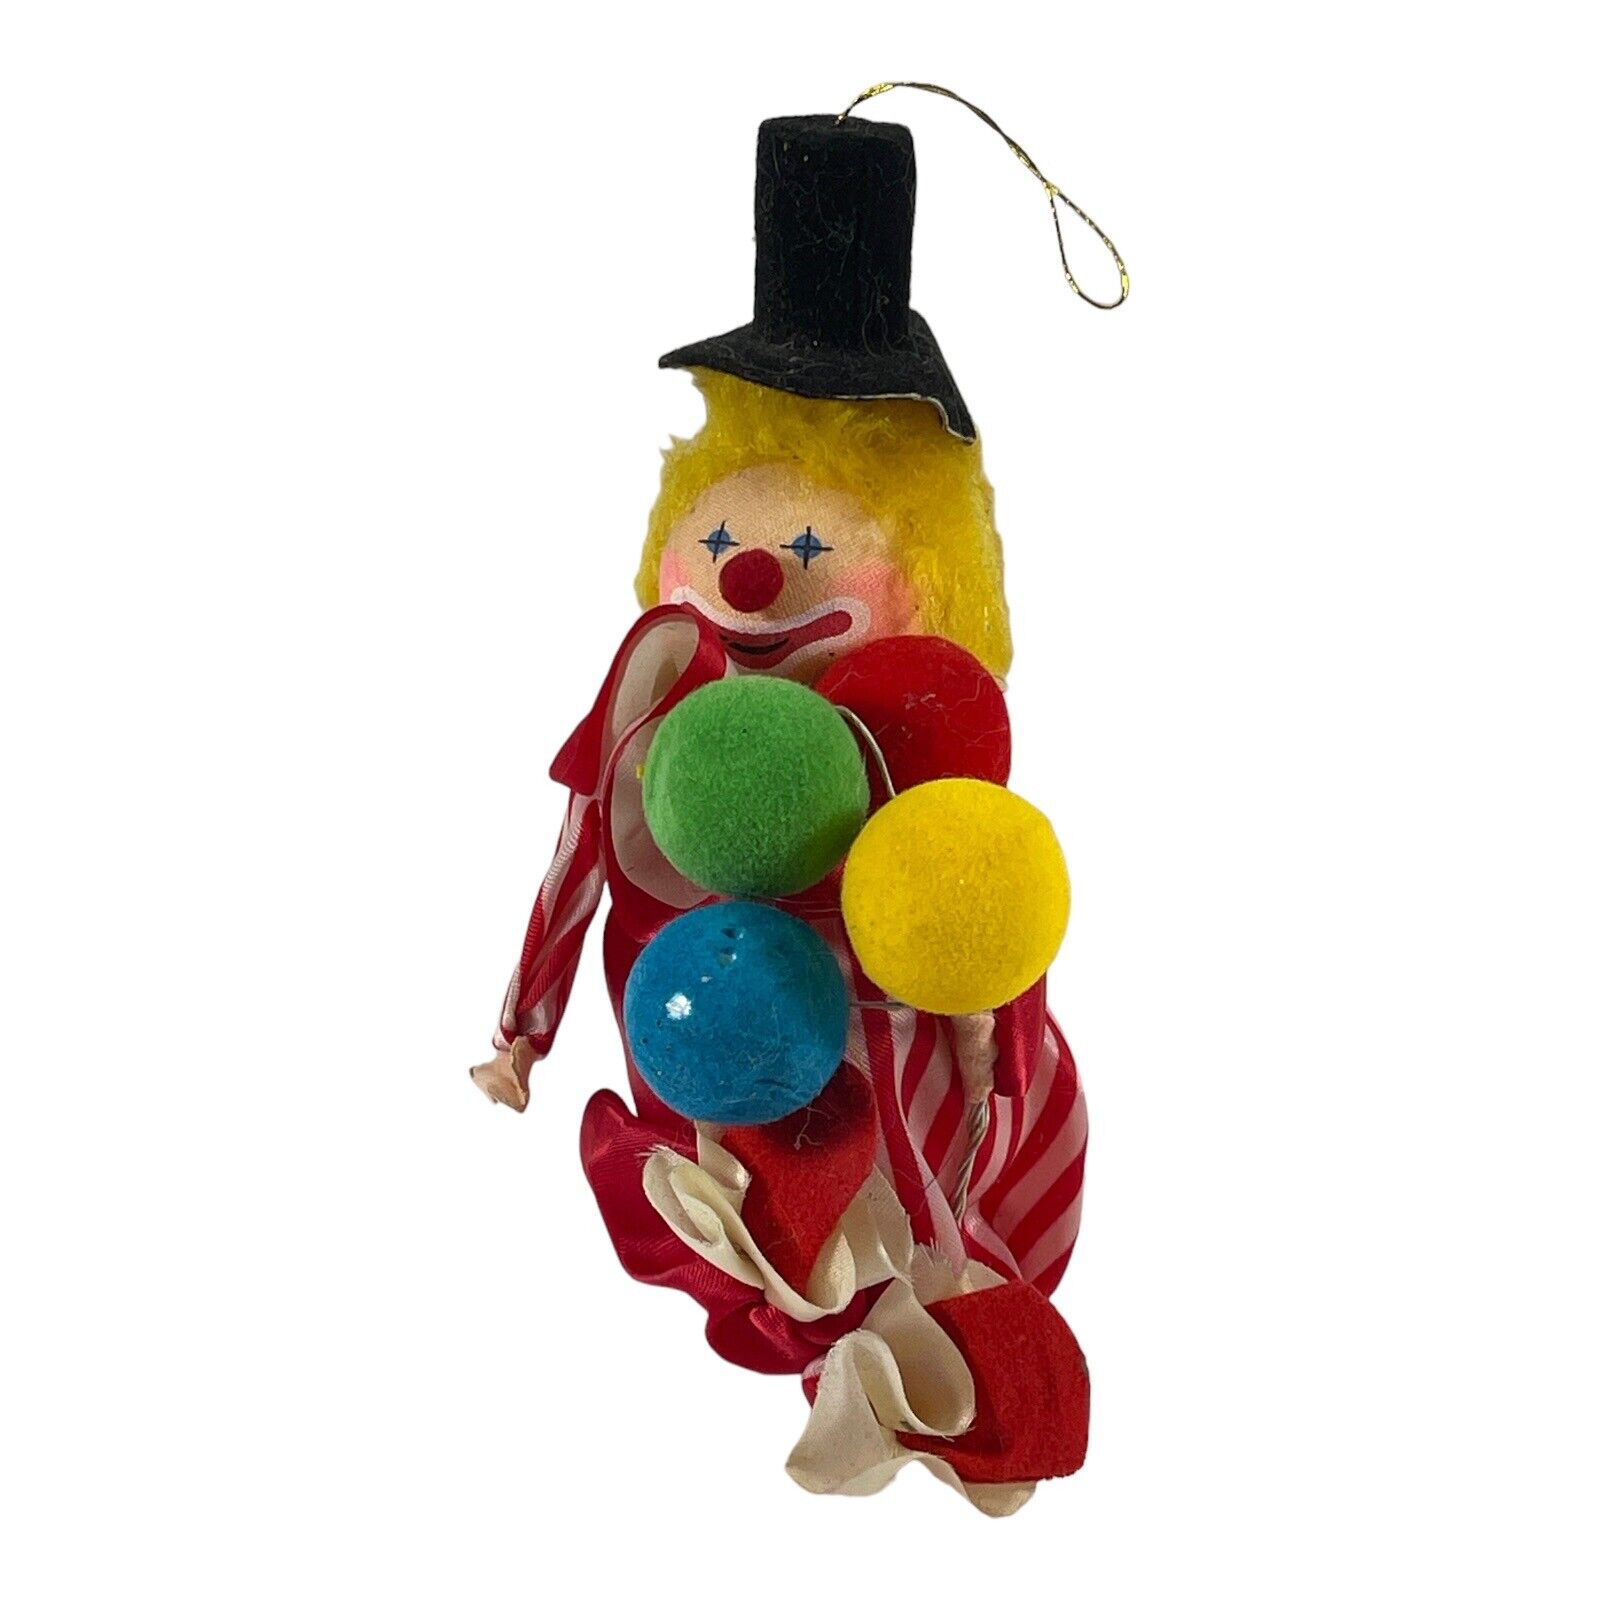 Vintage Clown Ornament Plush Berrie & Co Hat Balloons Christmas Holiday Circus